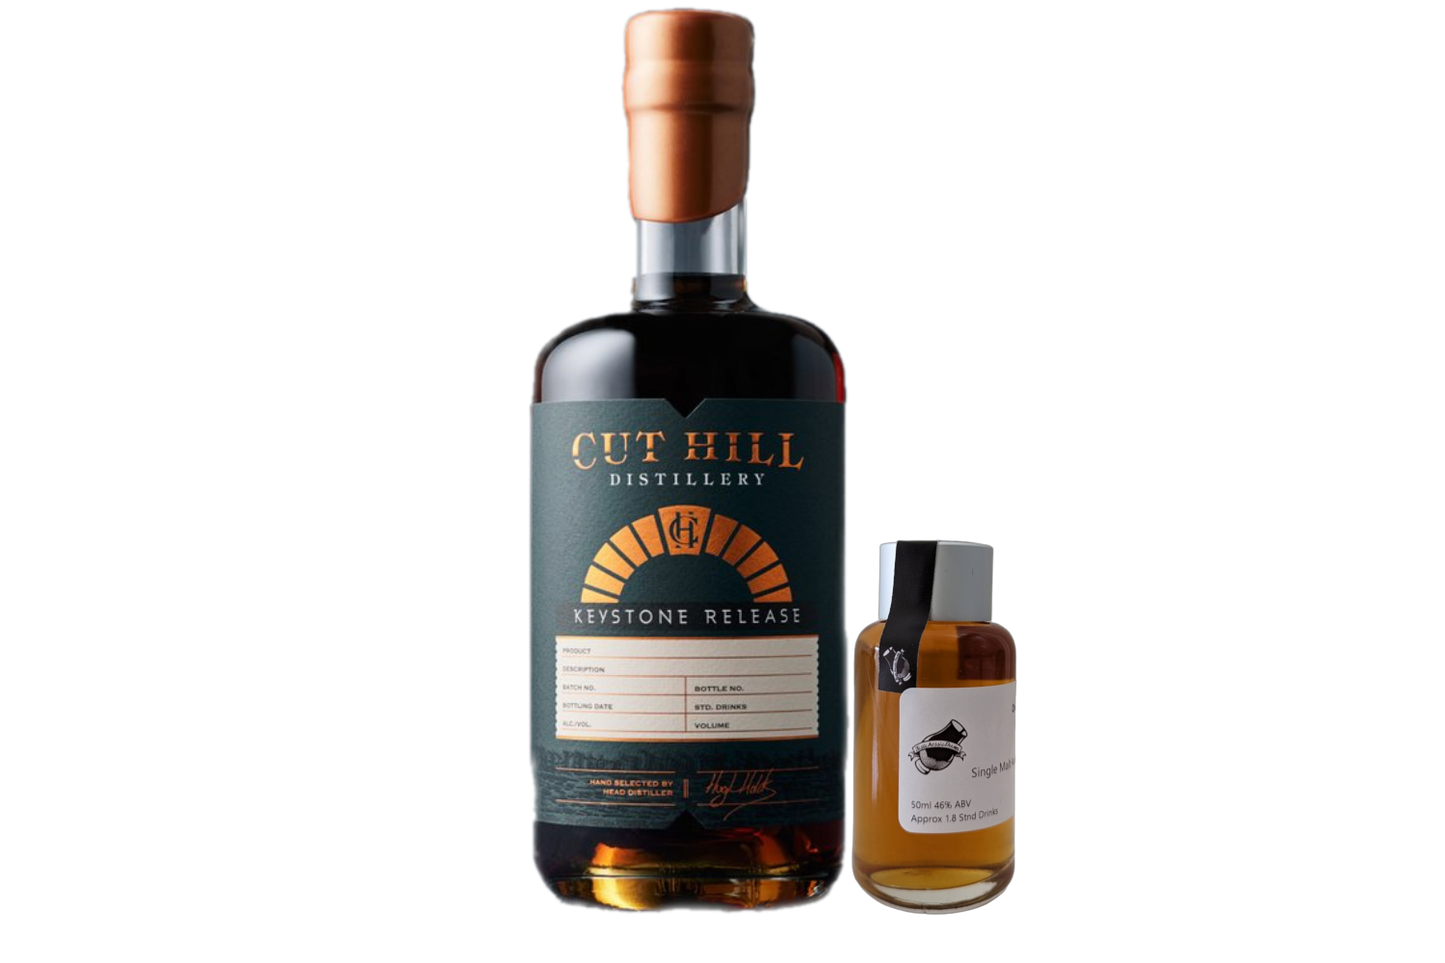 Cut Hill Distillery 'Stonecutter Selection 2 Apera Single Cask' Various Size Samples